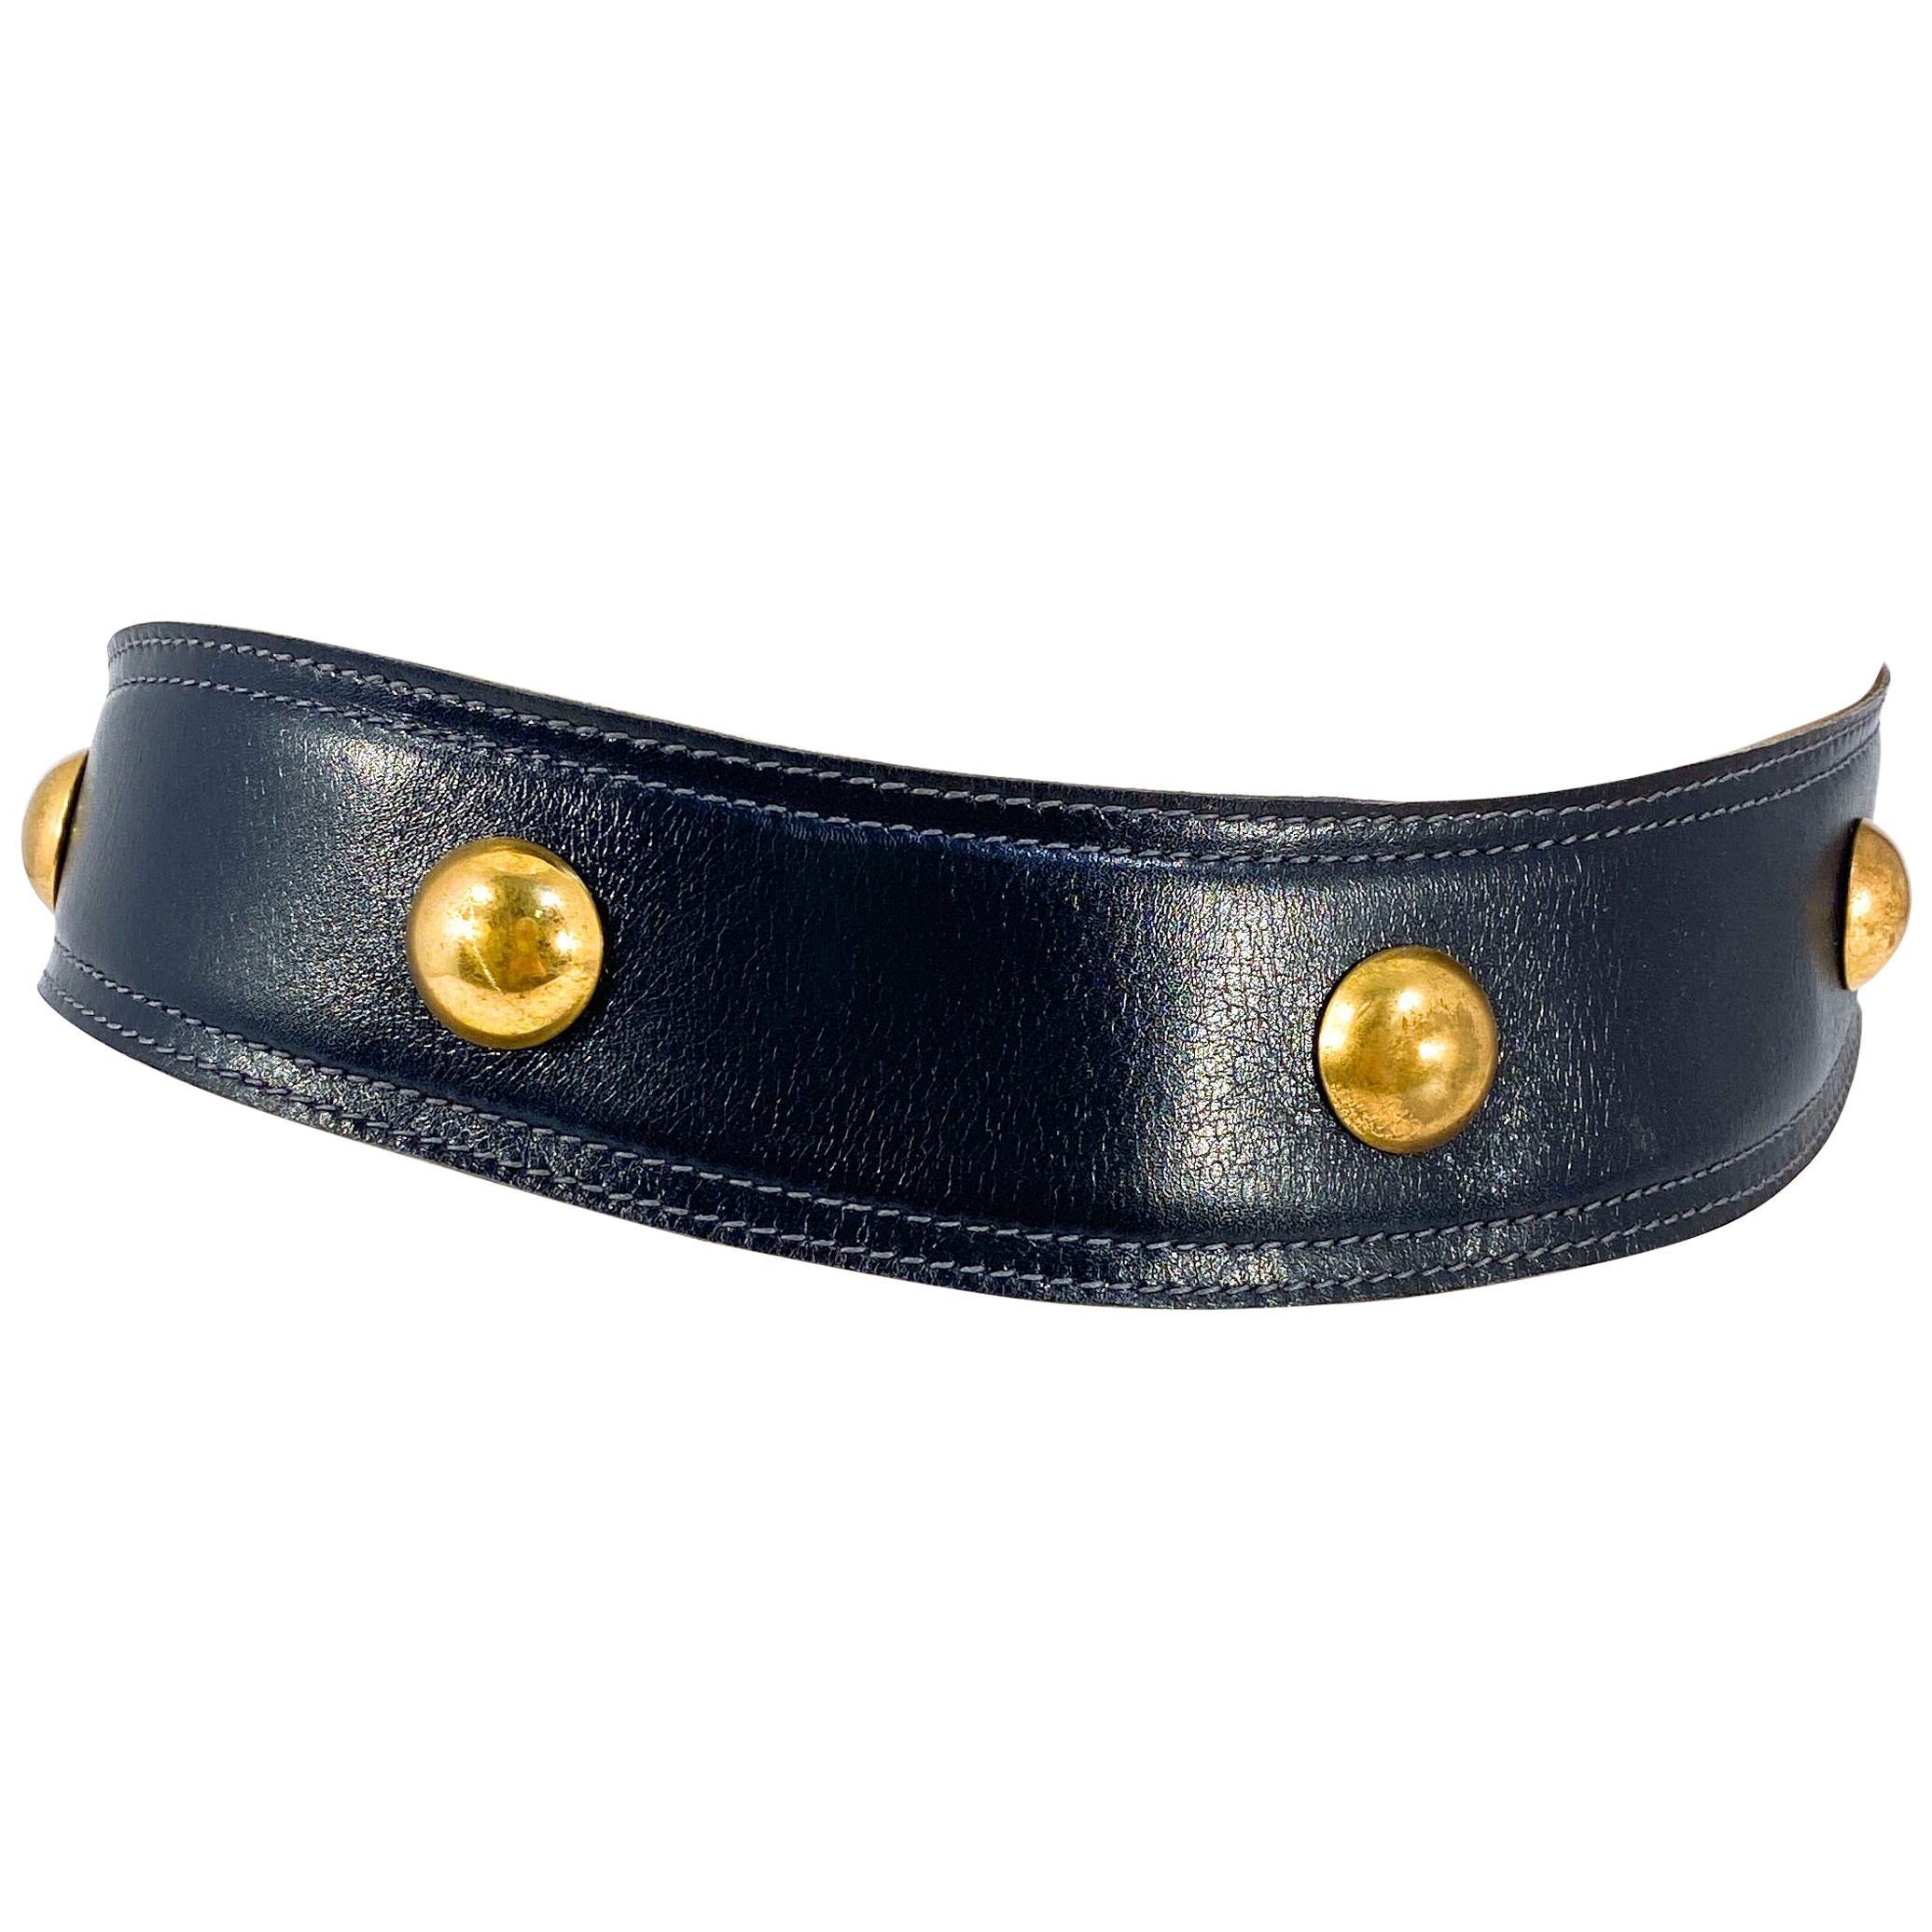 1950s Navy Leather Belt with Brass Studs